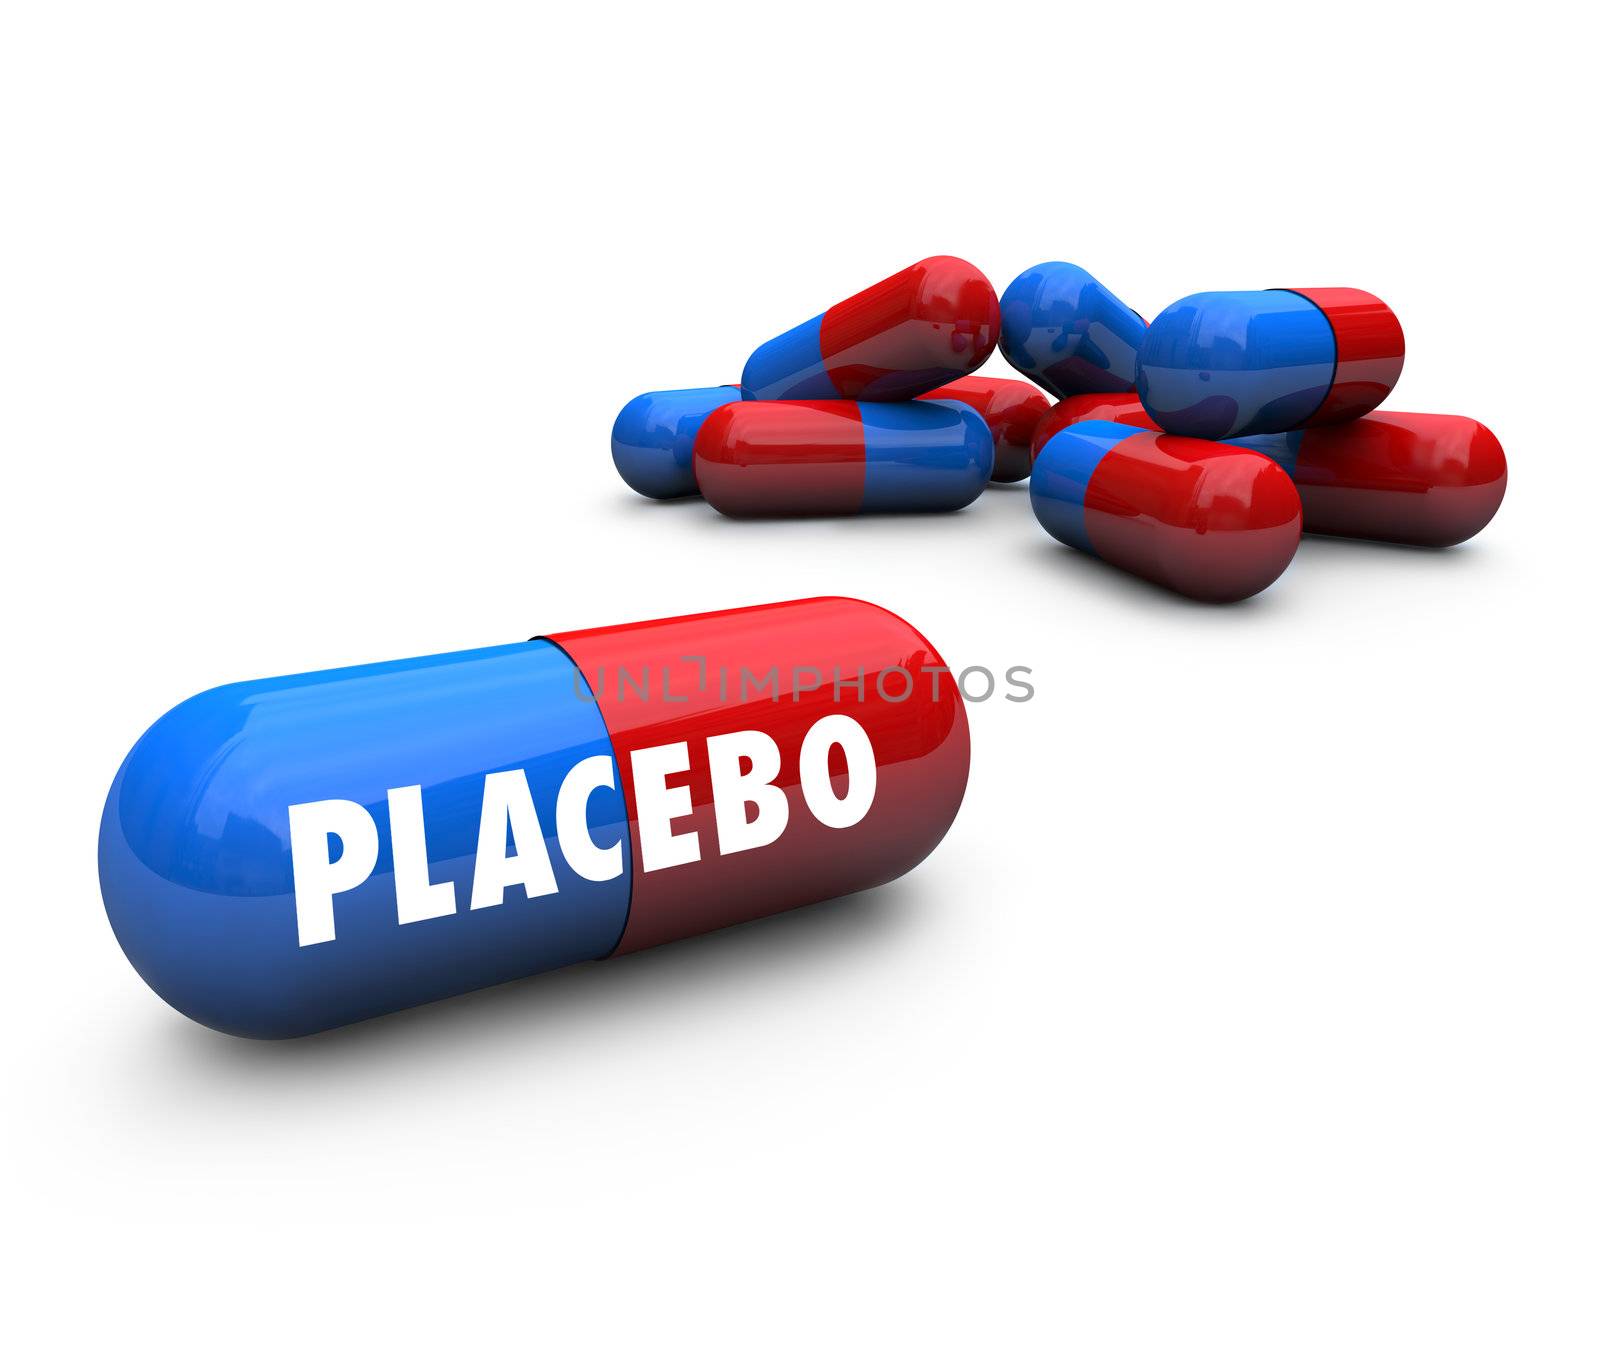 Close-up of some pills, with one featuring the words Placebo, symbolizing the test sample of a medicine that is given to a control group in medical research, one that contains no real medicinal value